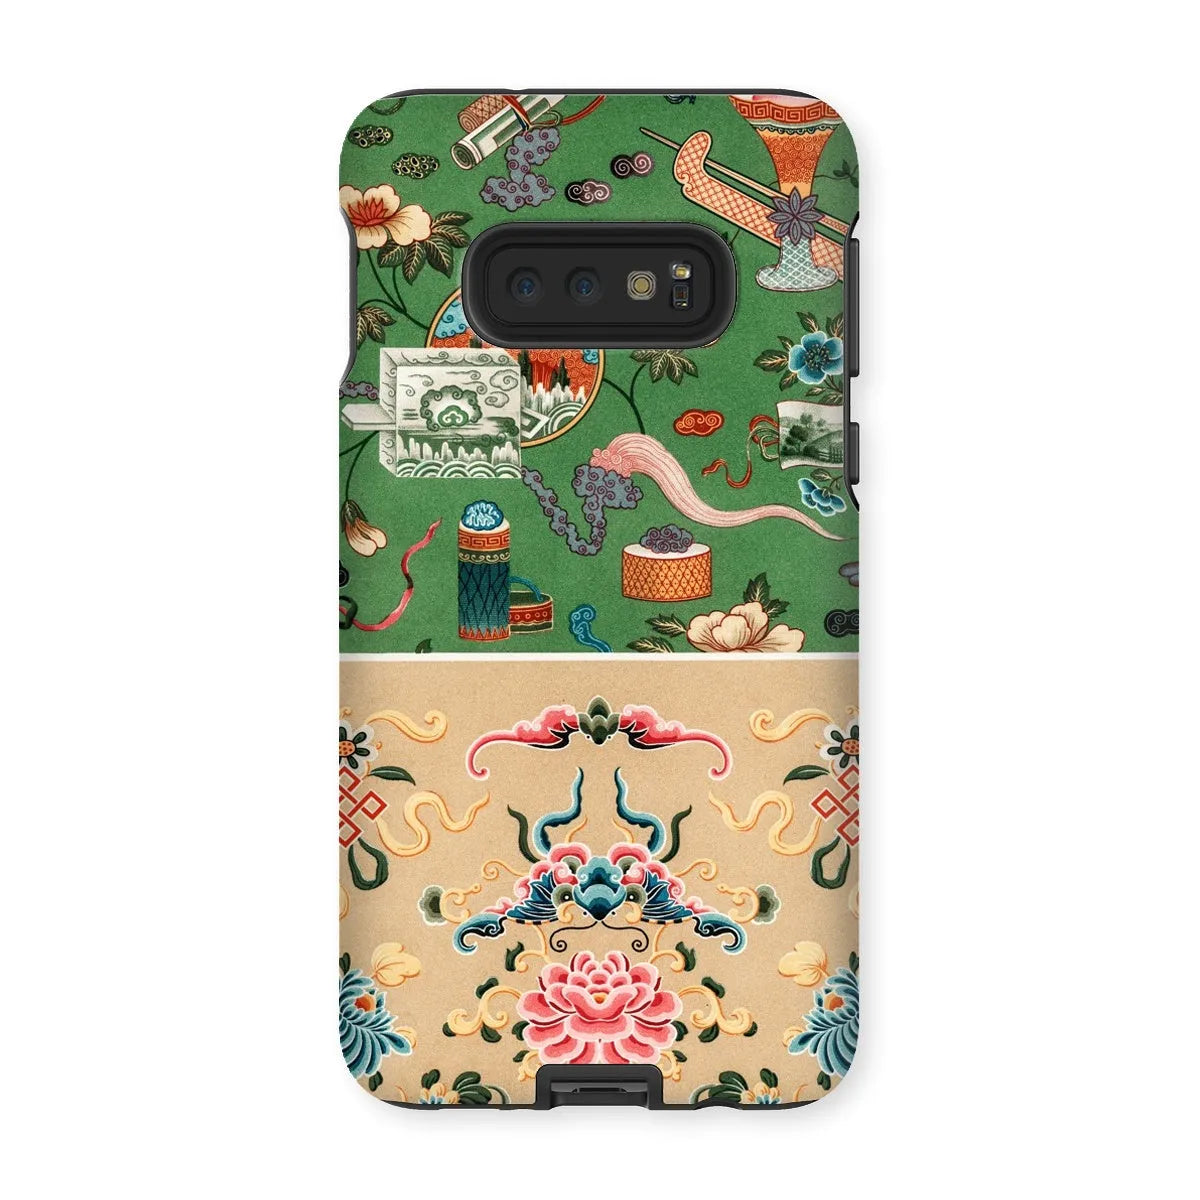 This Chinese Pattern By Auguste Racinet Tough Phone Case - Samsung Galaxy S10e / Matte - Mobile Phone Cases - Aesthetic